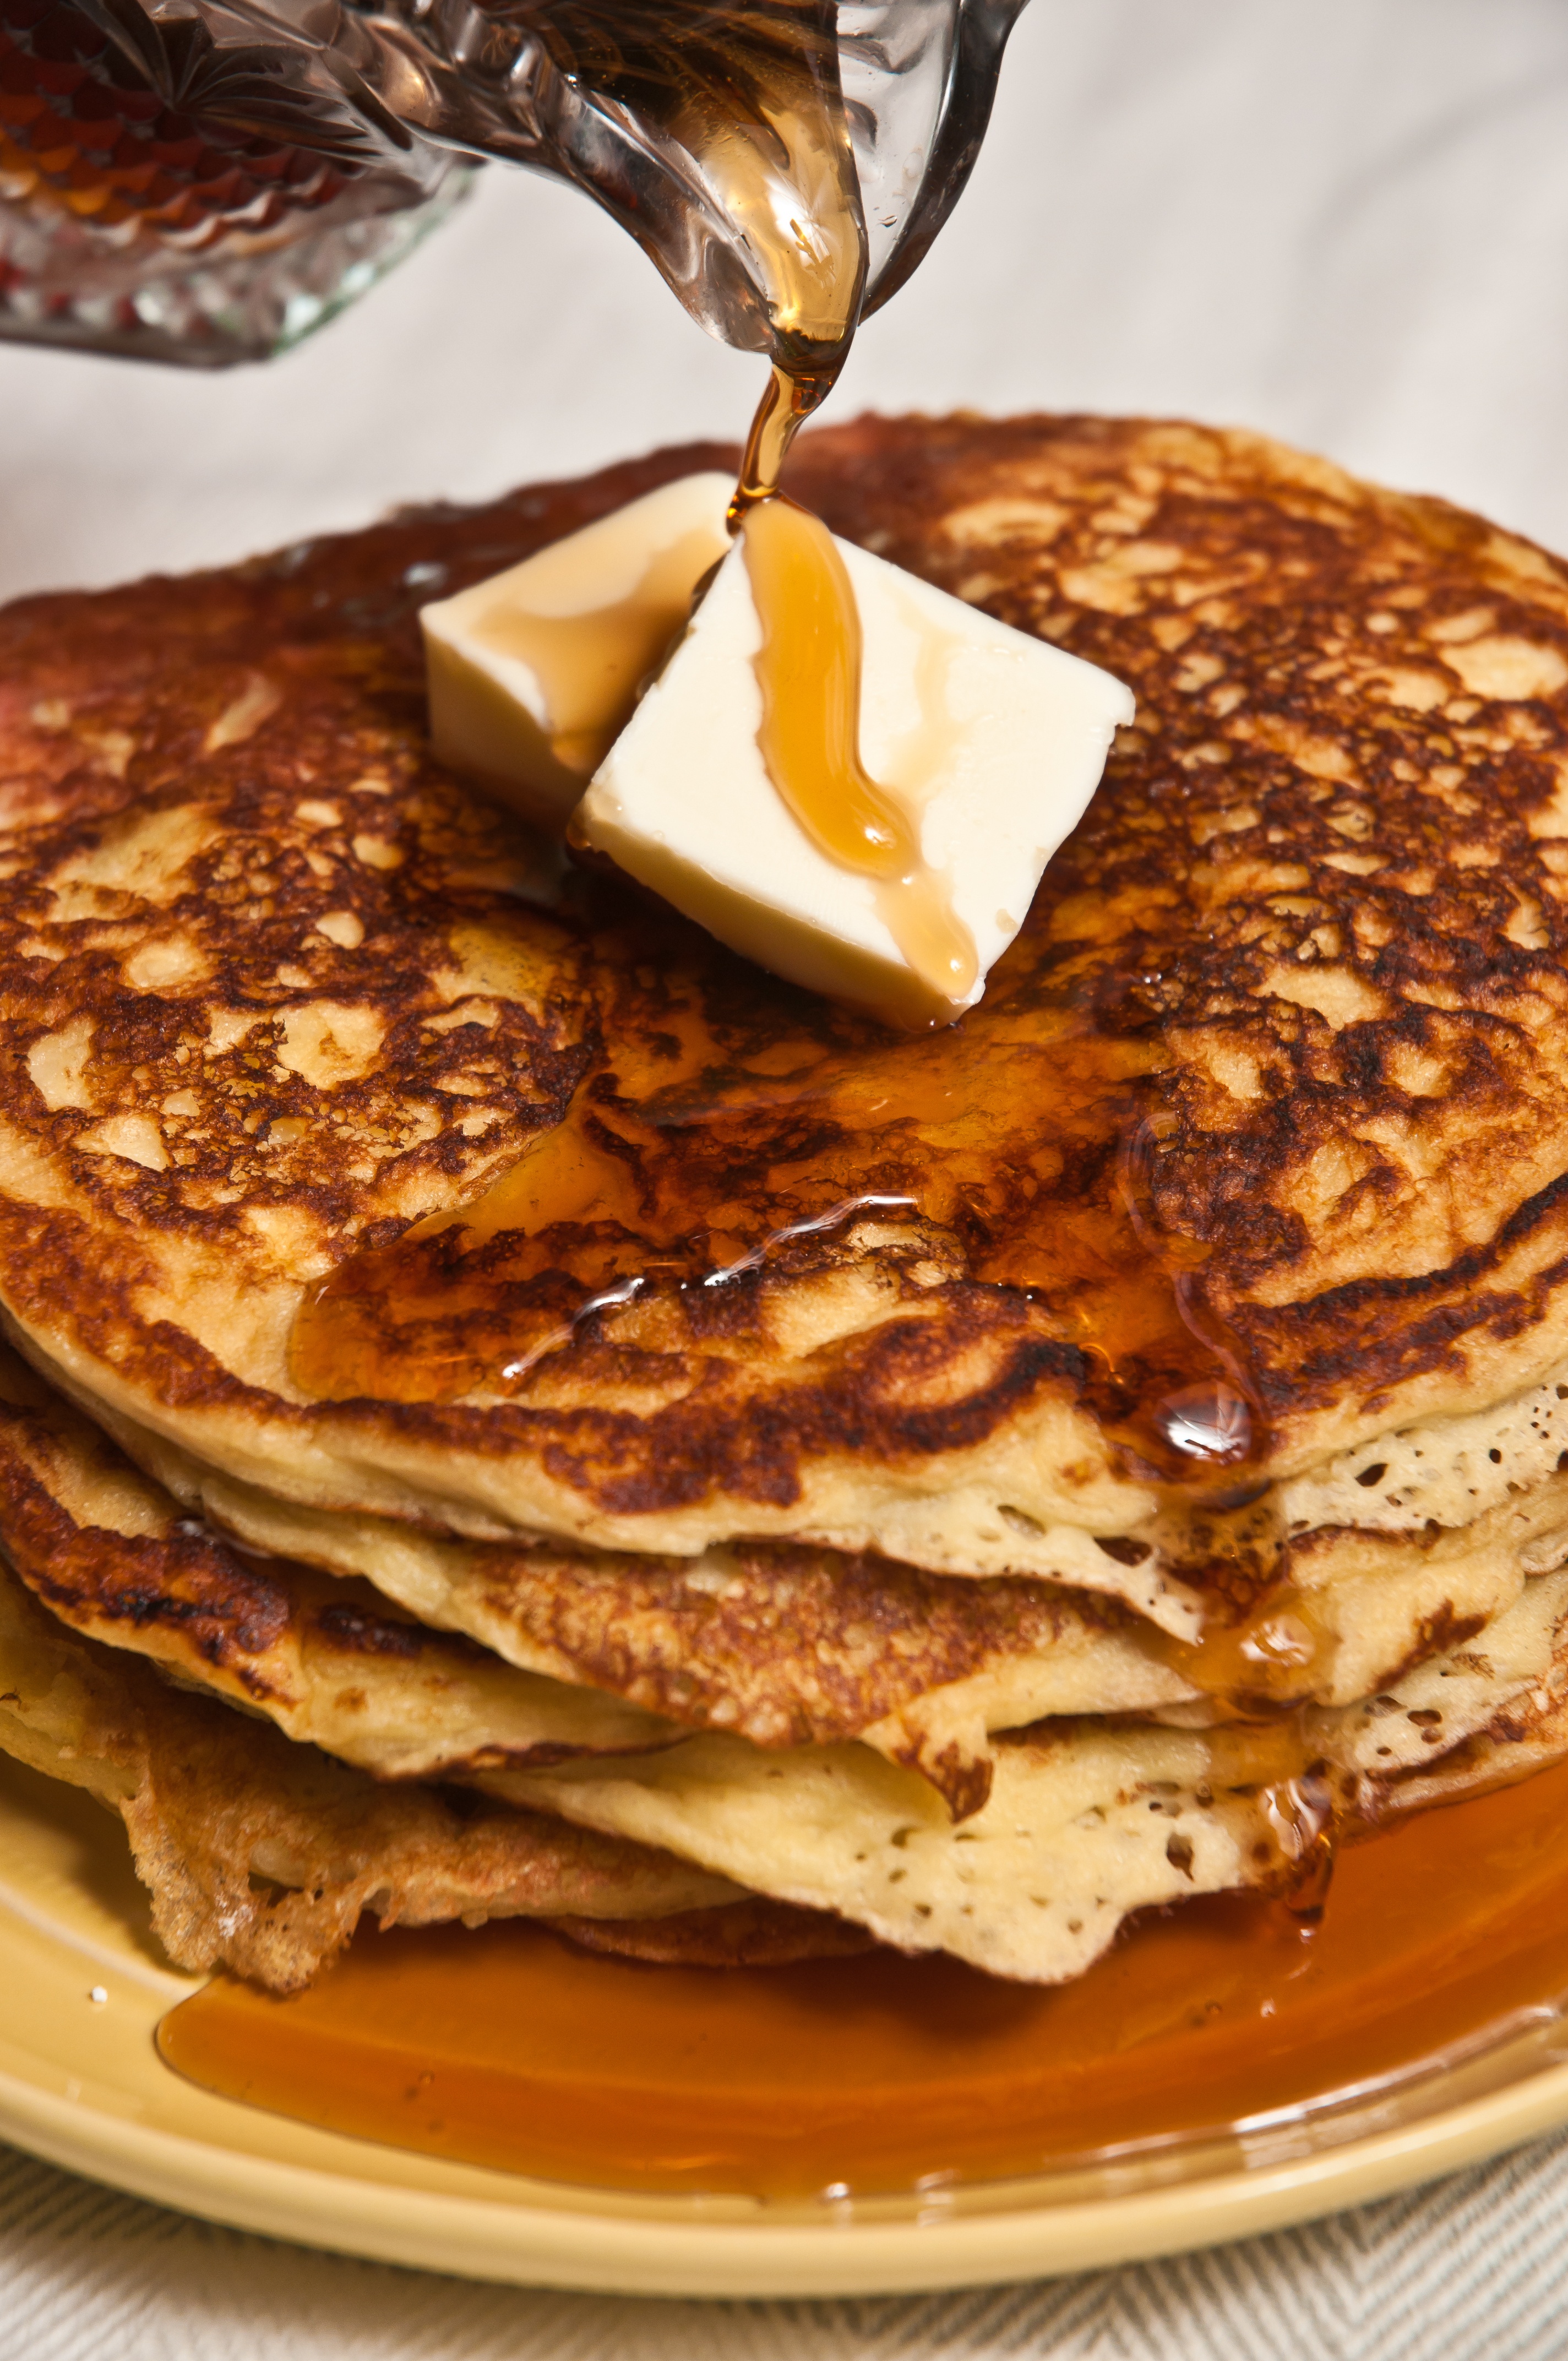 Light-as-a-Feather Whole Wheat Pancakes